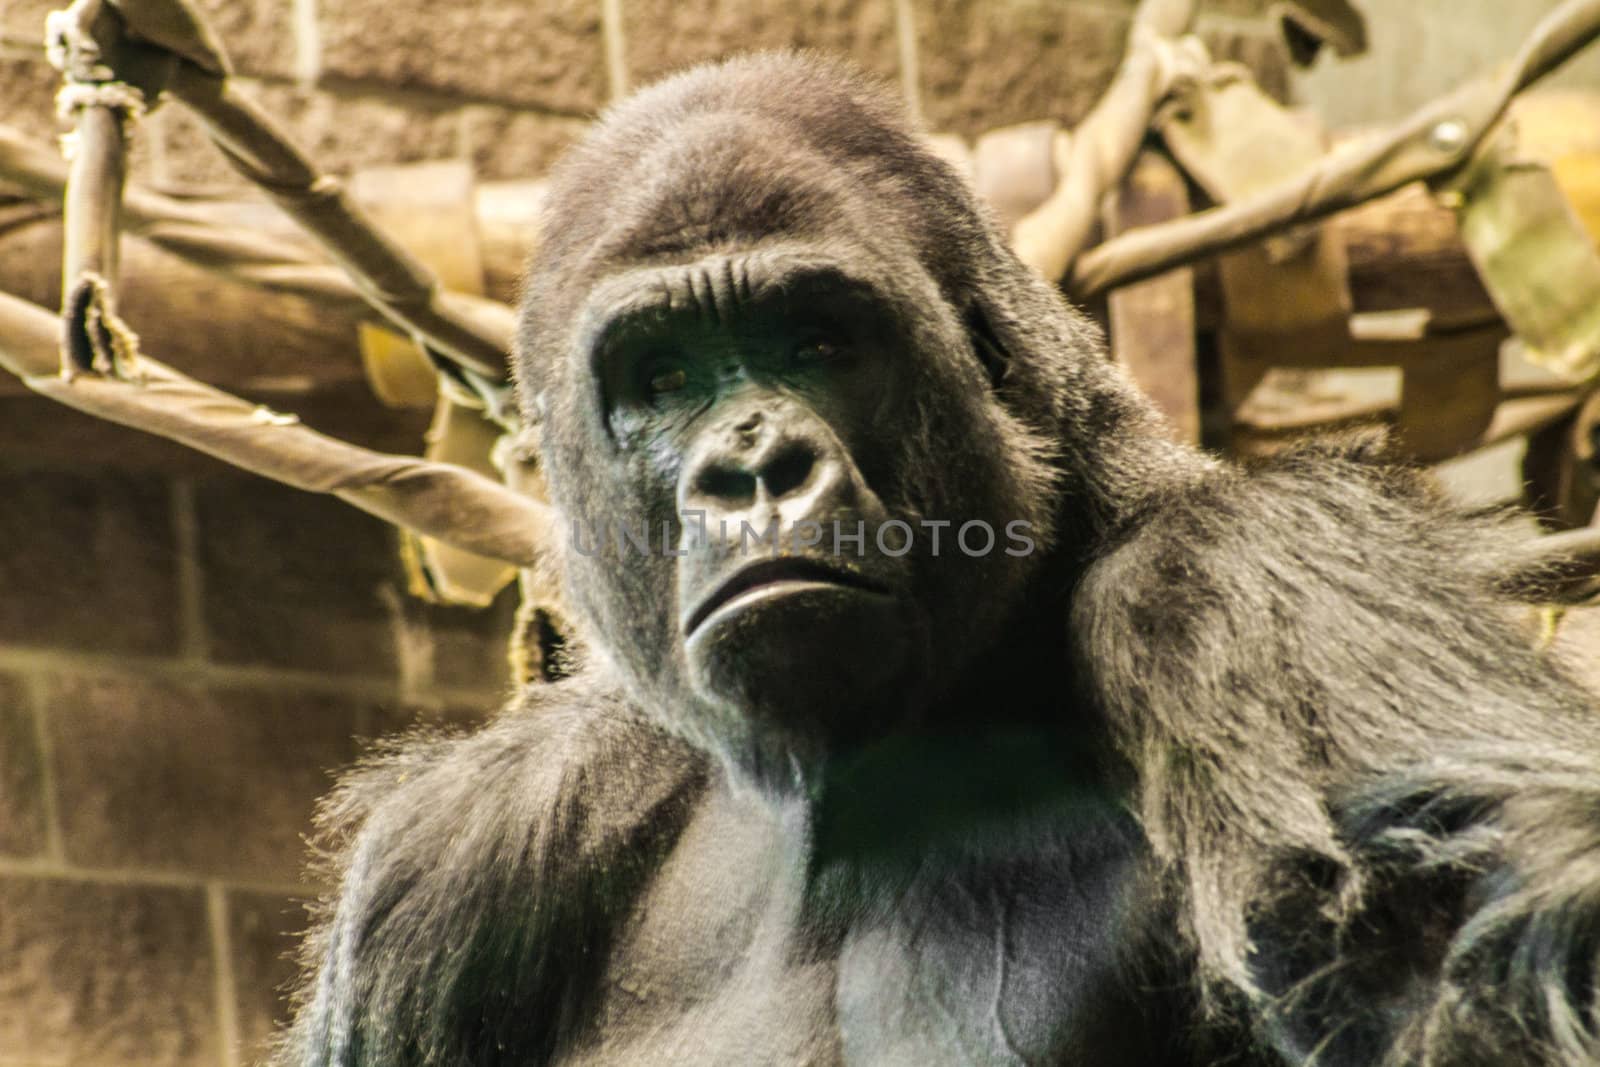 The expressive eyes of a Western Lowland Gorilla.

The western lowland gorilla lives in forests and lowland swamps in central Africa in Angola, Cameroon, Central African Republic, Congo, Democratic Republic of the Congo, Equatorial Guinea and Gabon.